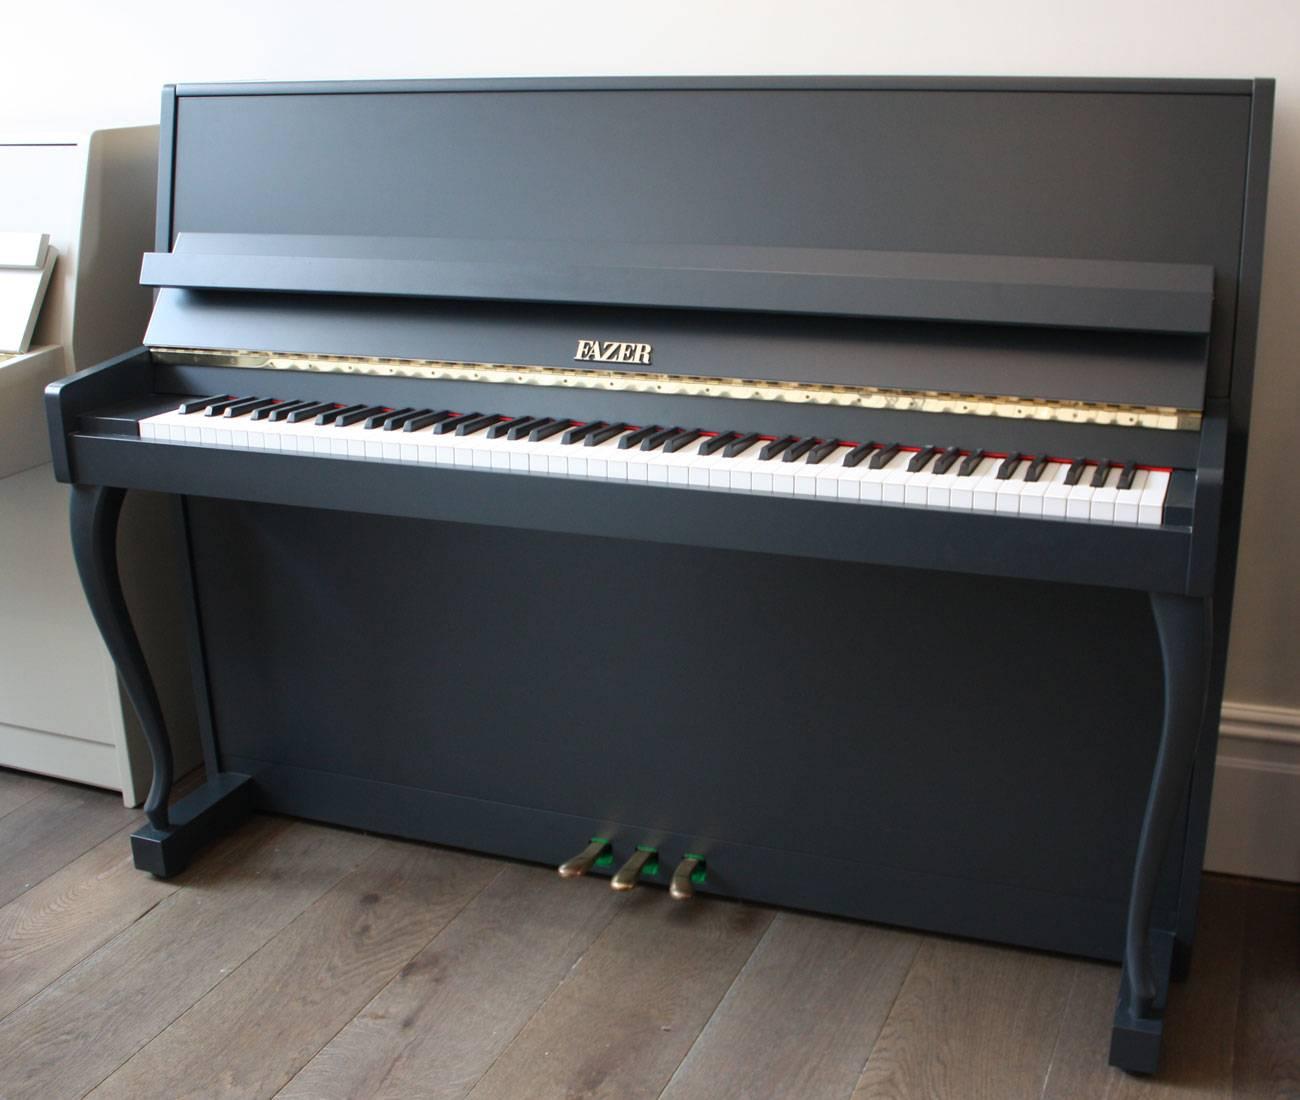 A stylish piano made by the Finnish company Fazer. Fazer produced good quality upright pianos that have stabile tuning and good responsive actions. This model has a good medium touch and clear resonant tone with warmth. It has been expertly finished